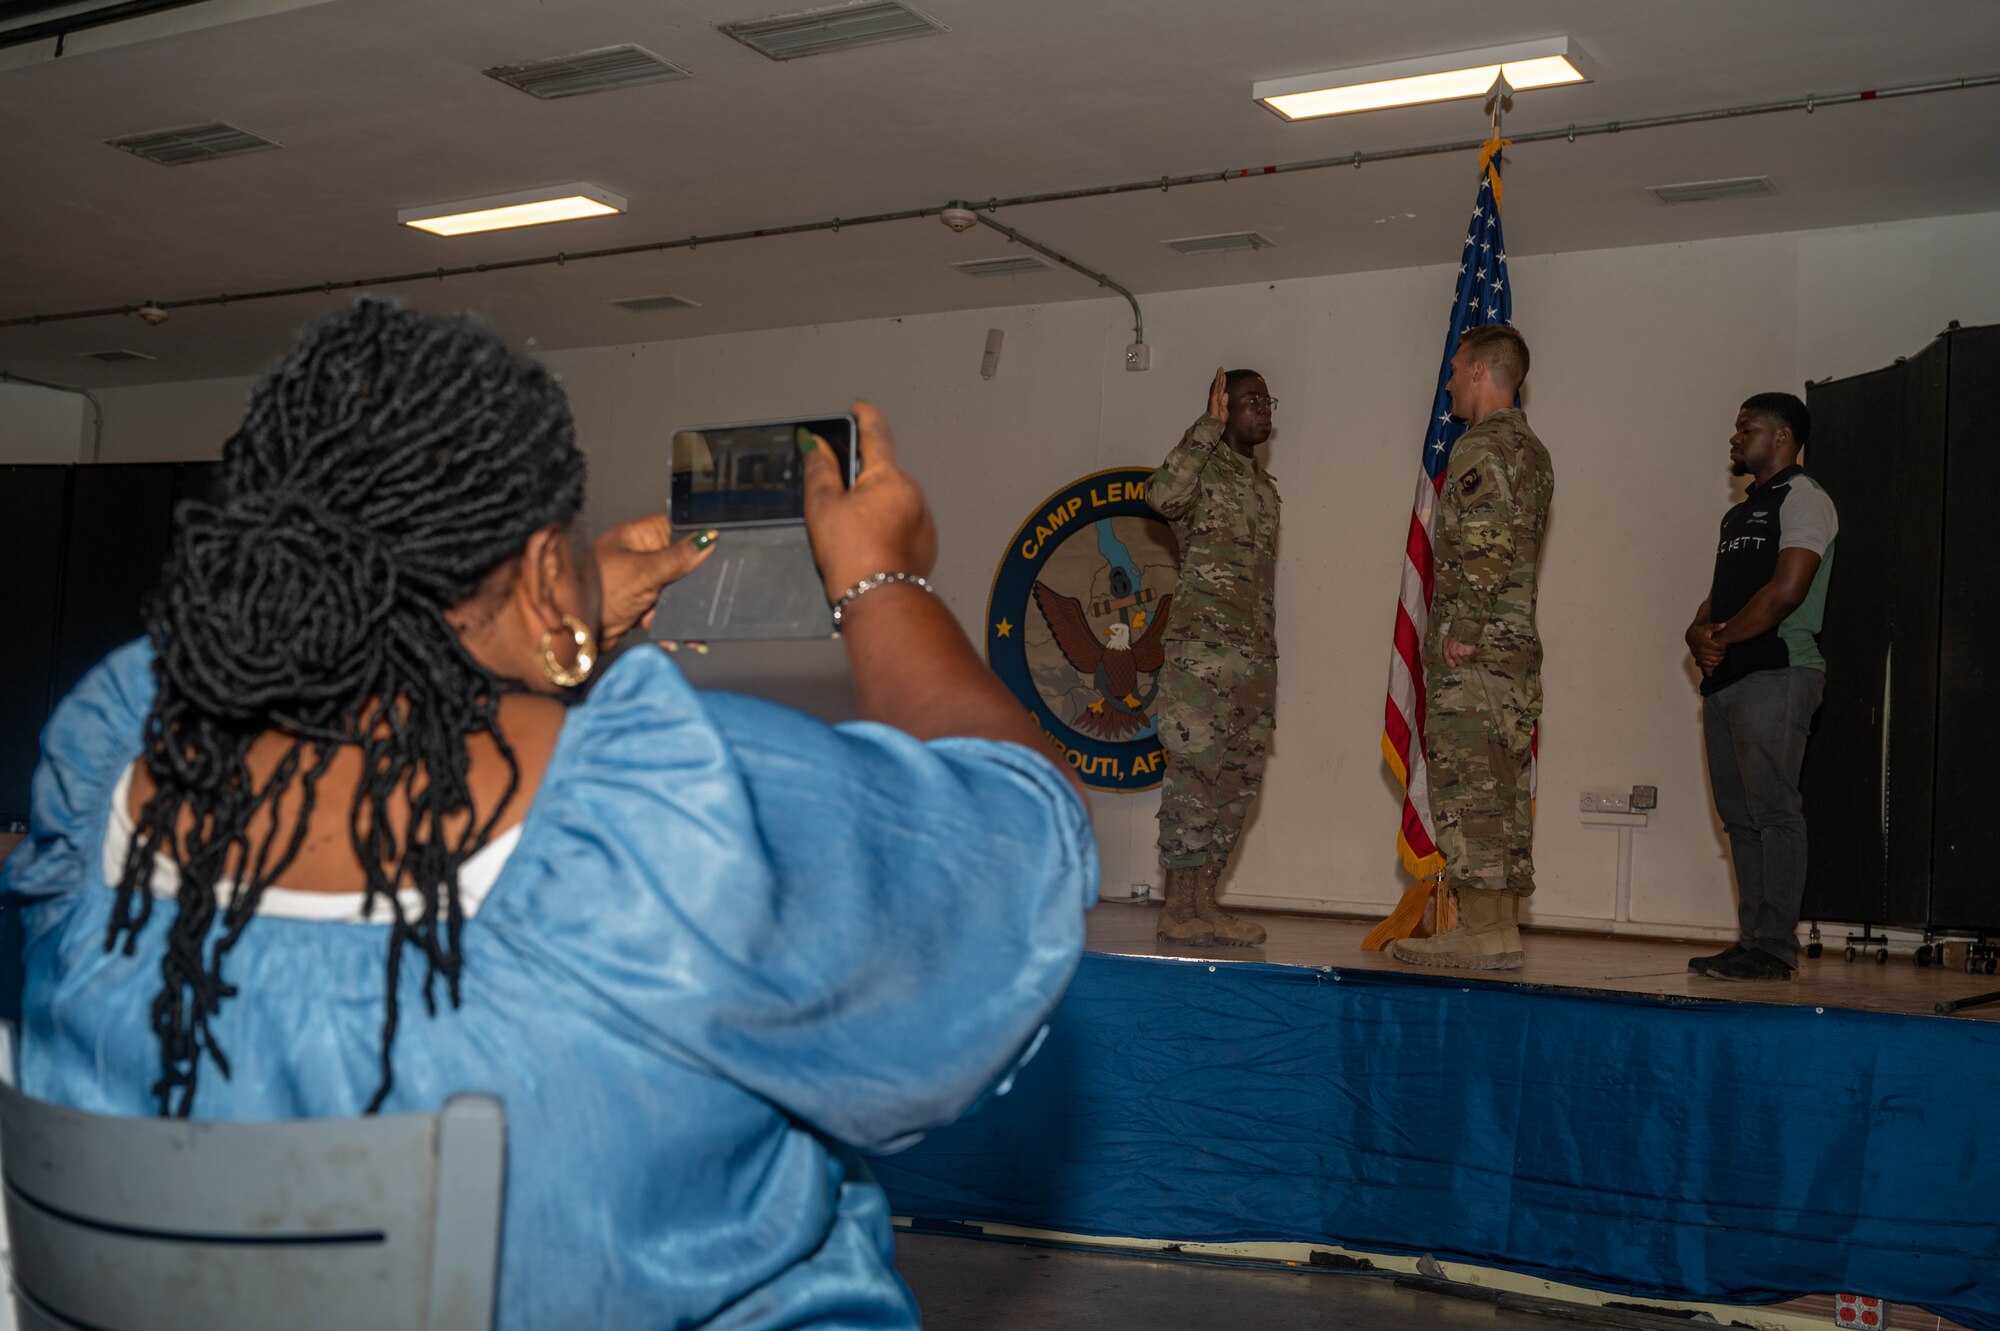 A women sitting in the crowd of a U.S. military promotion ceremony takes a photo on her phone